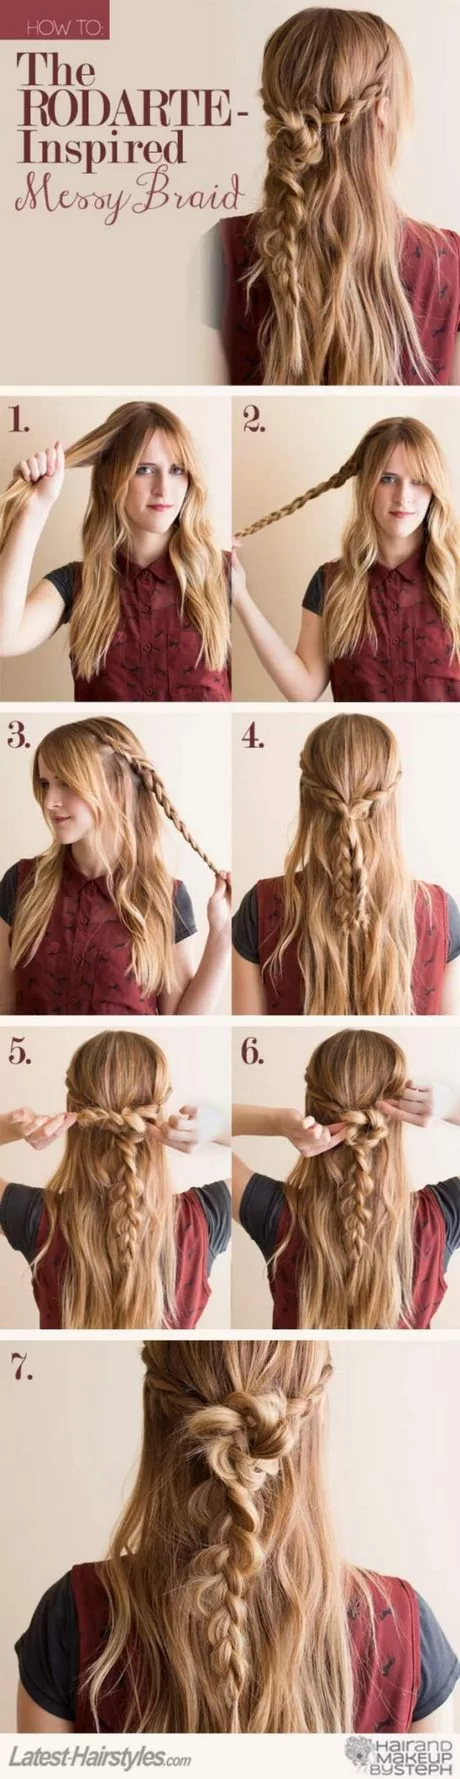 Cute and easy half up half down hairstyles cute-and-easy-half-up-half-down-hairstyles-24_11-2-2